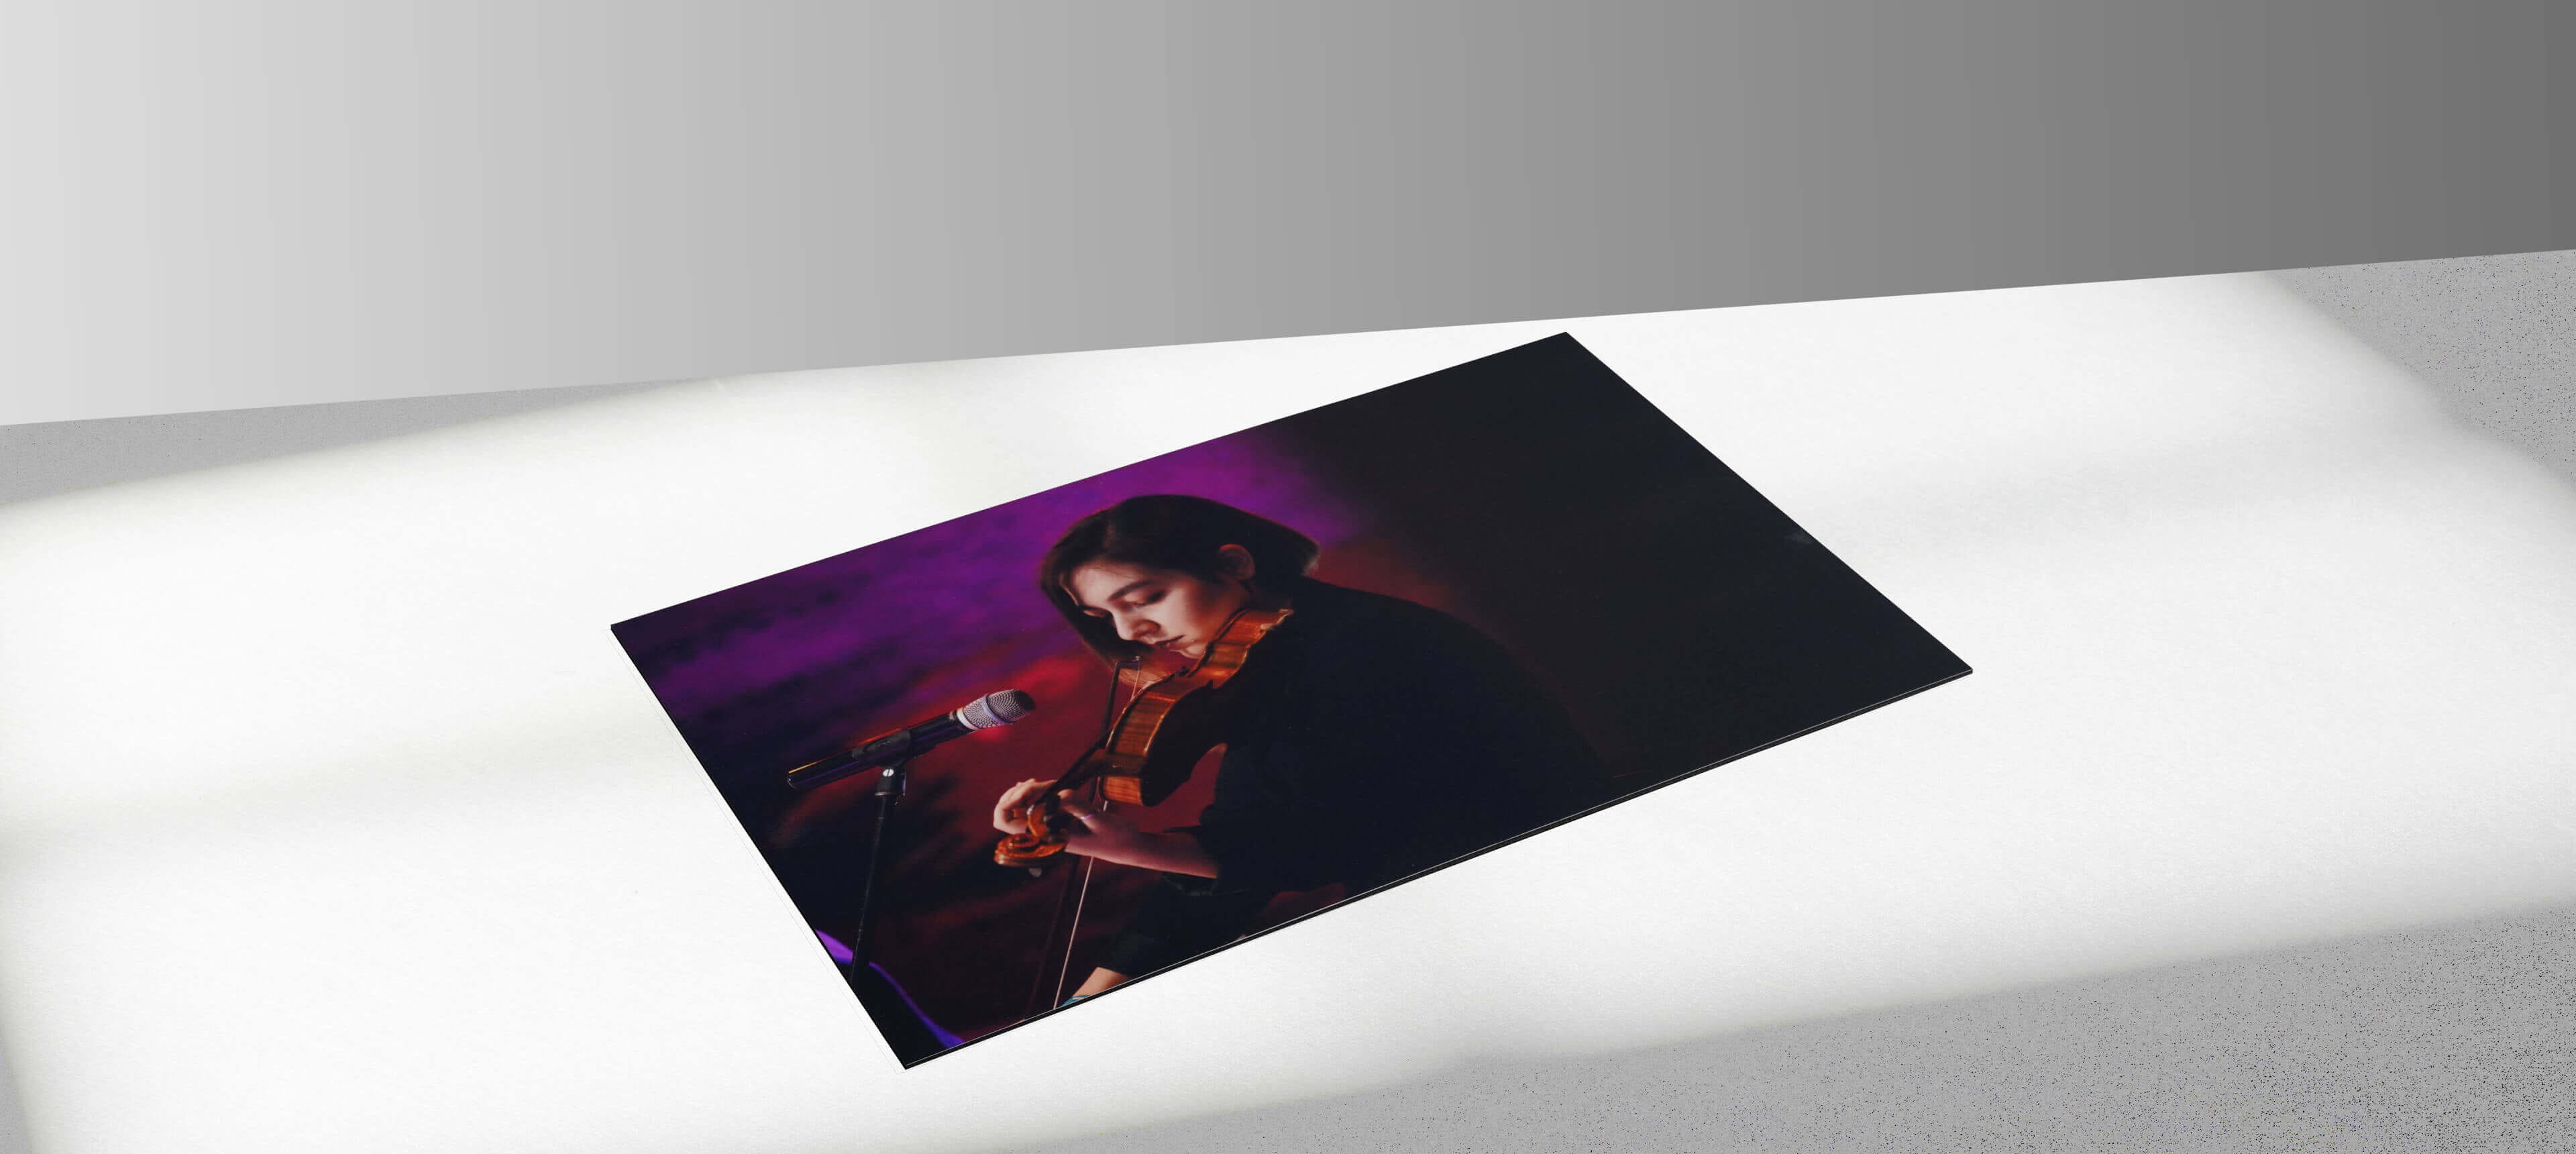 photographic print showing a woman in black sweater playing a violin